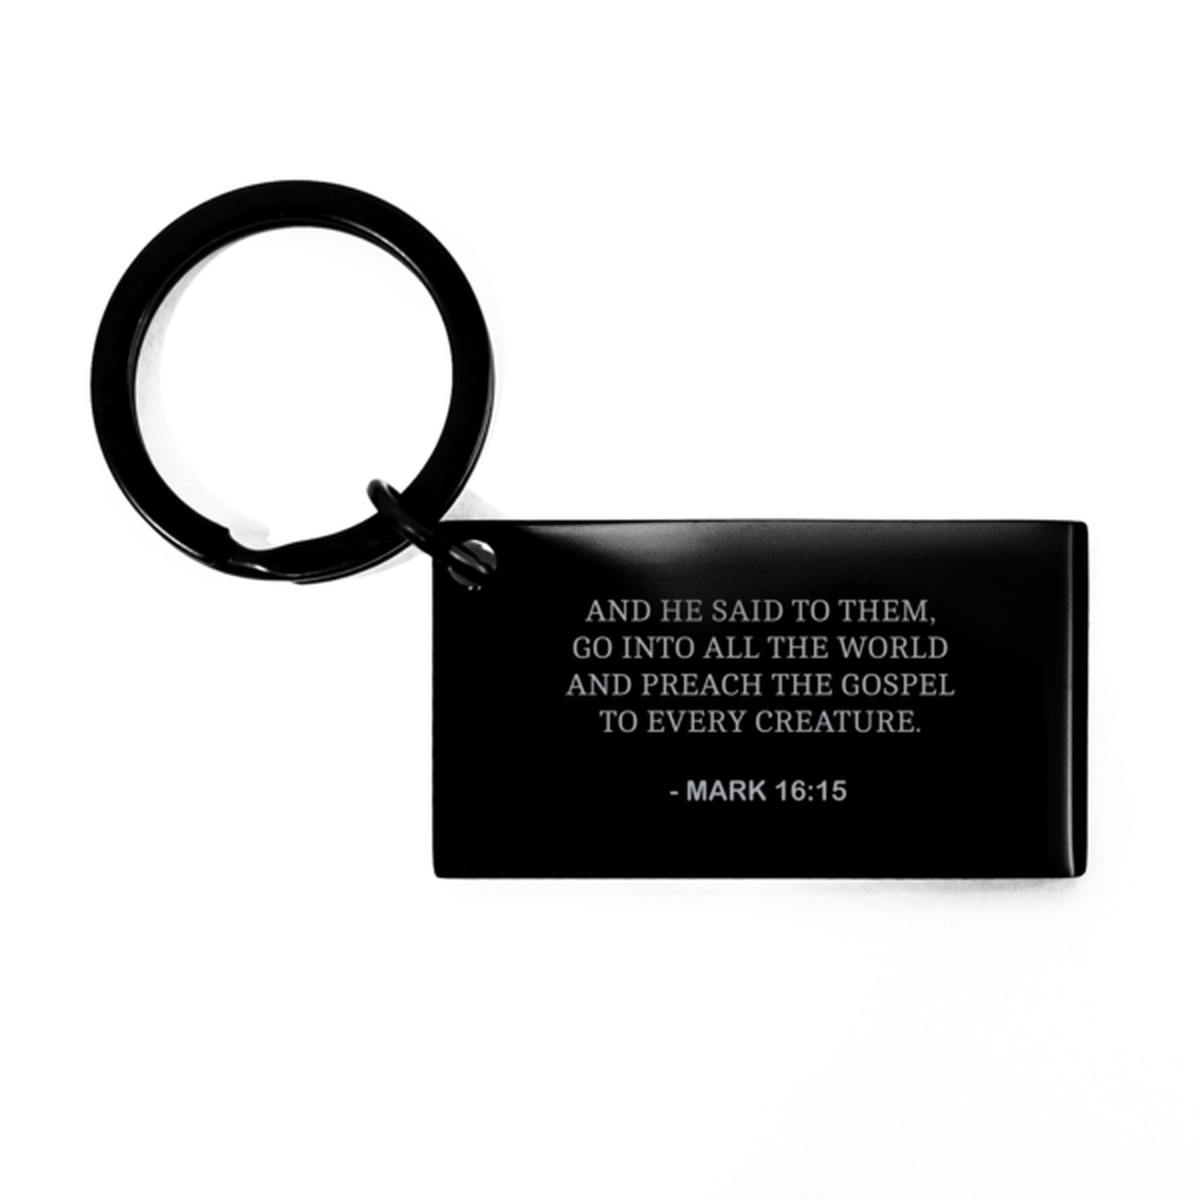 Bible Verse Black Keychain, Mark 16:15 And He Said To Them, Go Into All The World And, Christian Inspirational Key Ring Gifts For Men Women